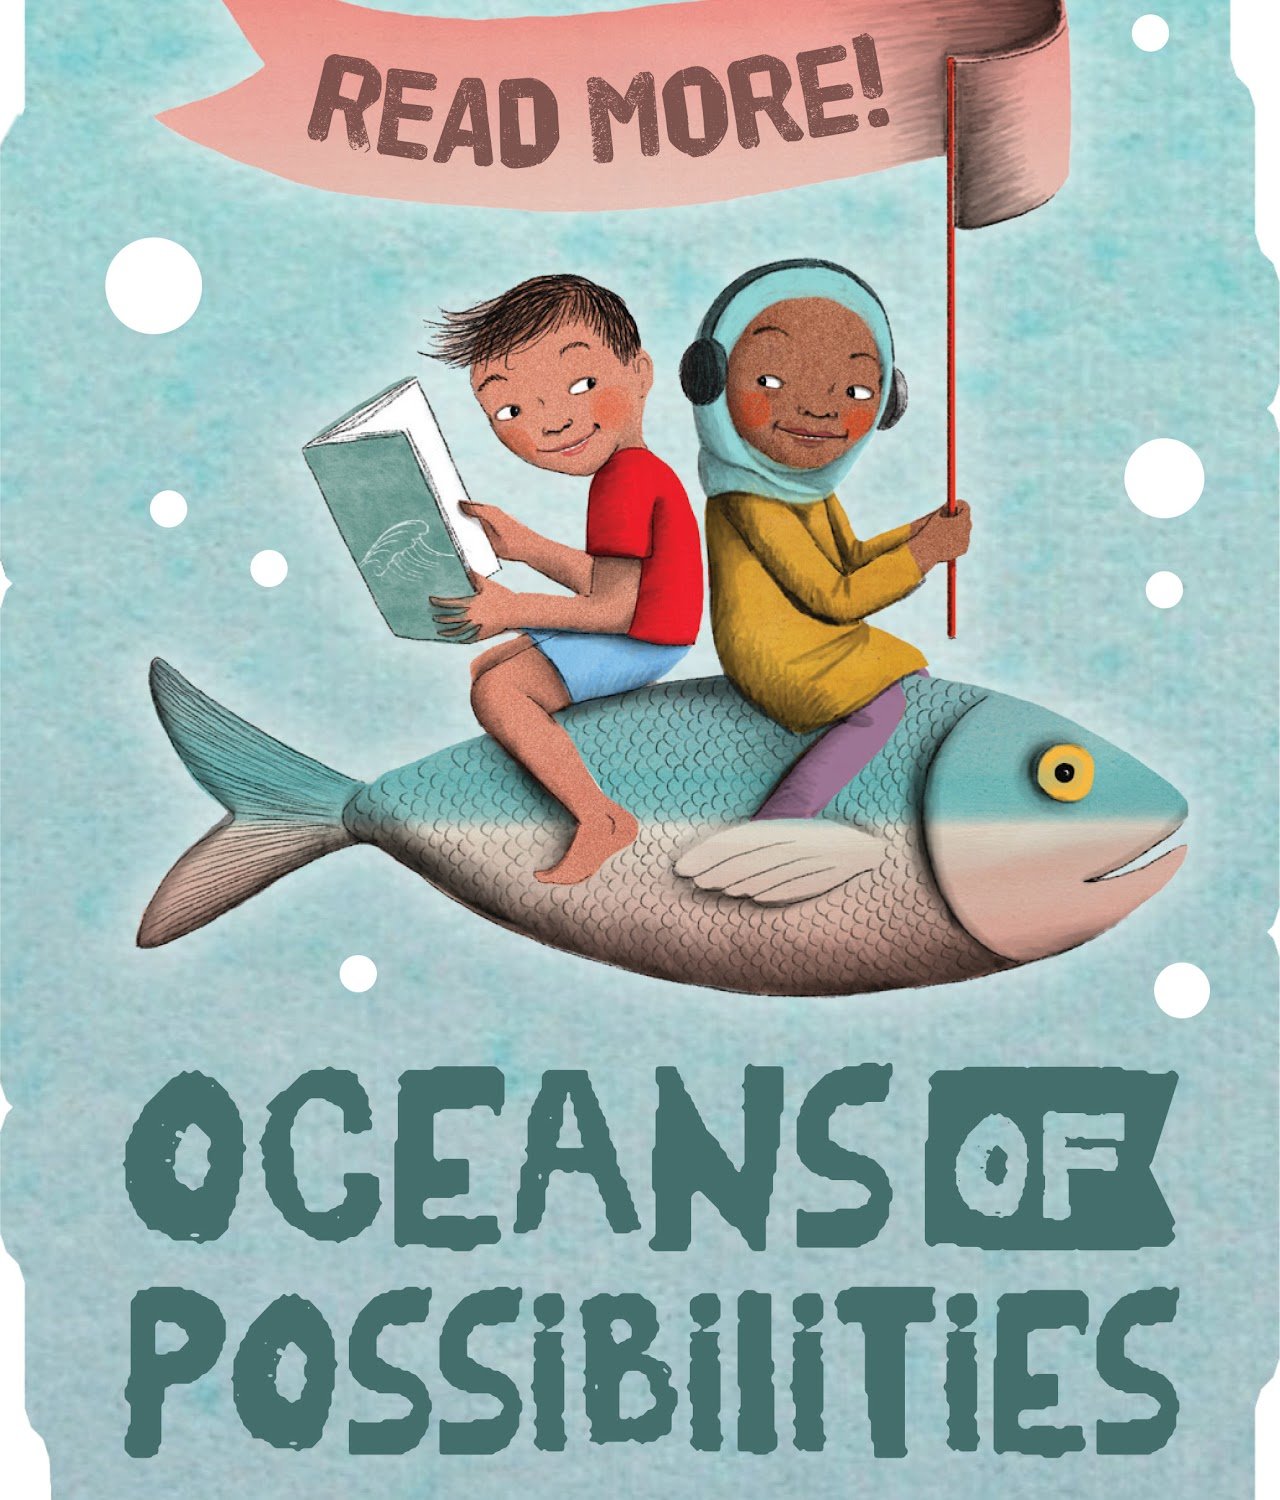 Jervis Public Library, 613 N. Washington St. will host an “Ocean Fossils” event on Thursday, June 30, at 5:30 p.m.